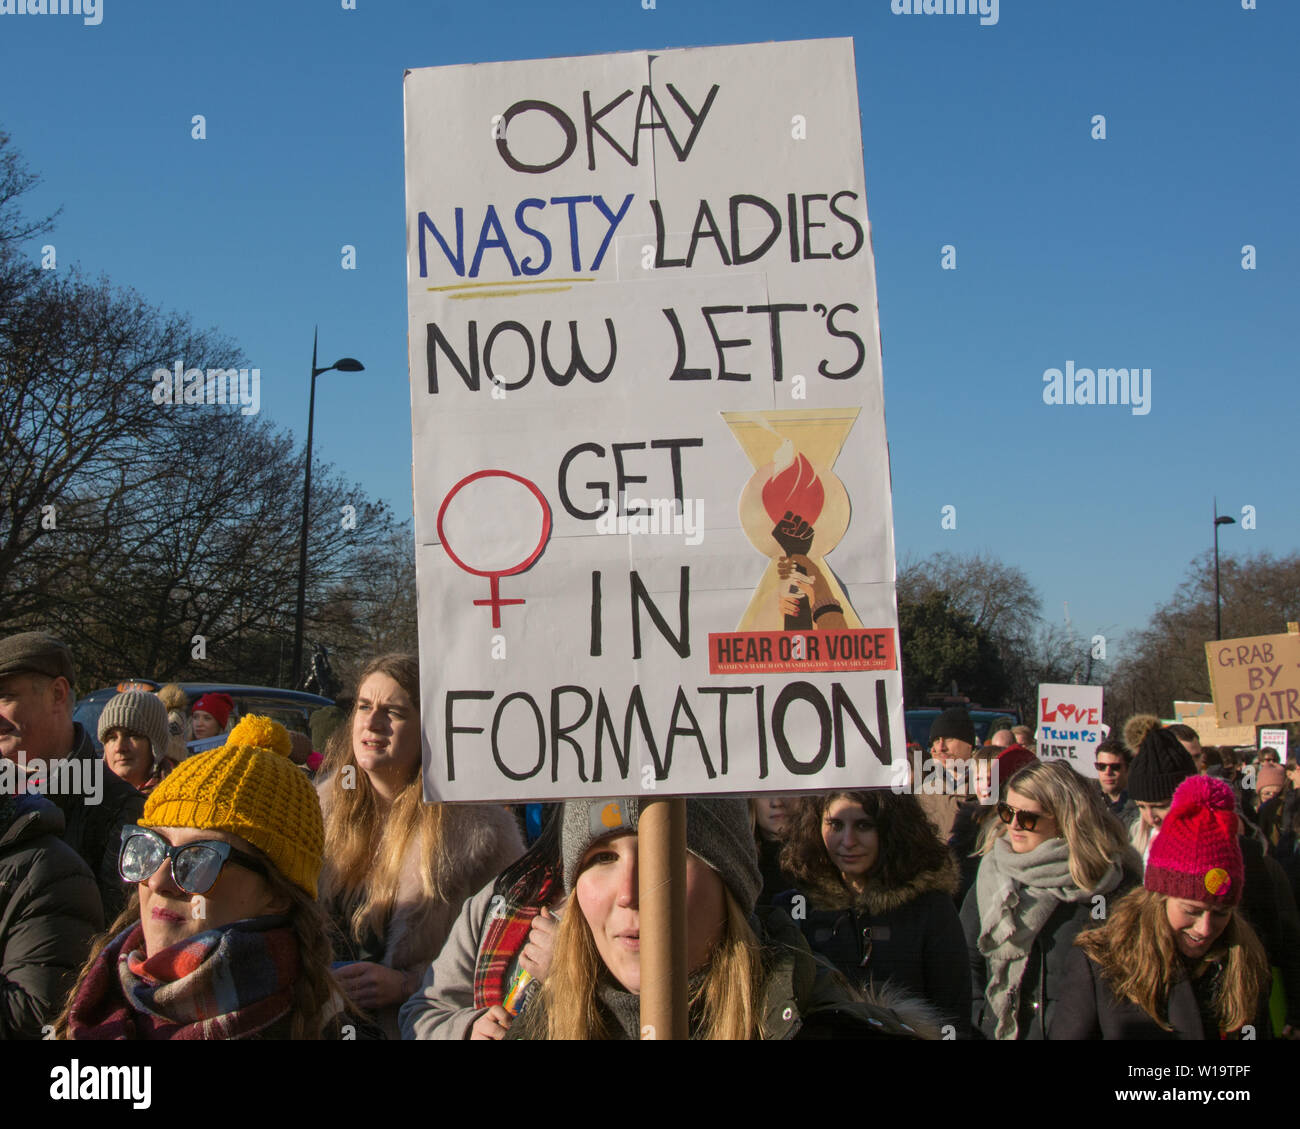 Women's March, London, UK, 21st January 2017. A female protester carries a placard paraphrasing a line in the Beyonce song 'Formation' during a protest the day after the inauguration of President Donald Trump. In full it reads 'Okay nasty ladies now let's get in formation'. Up to 10,000 took part in London as women worldwide marked the day by marching in an act of international solidarity. Stock Photo